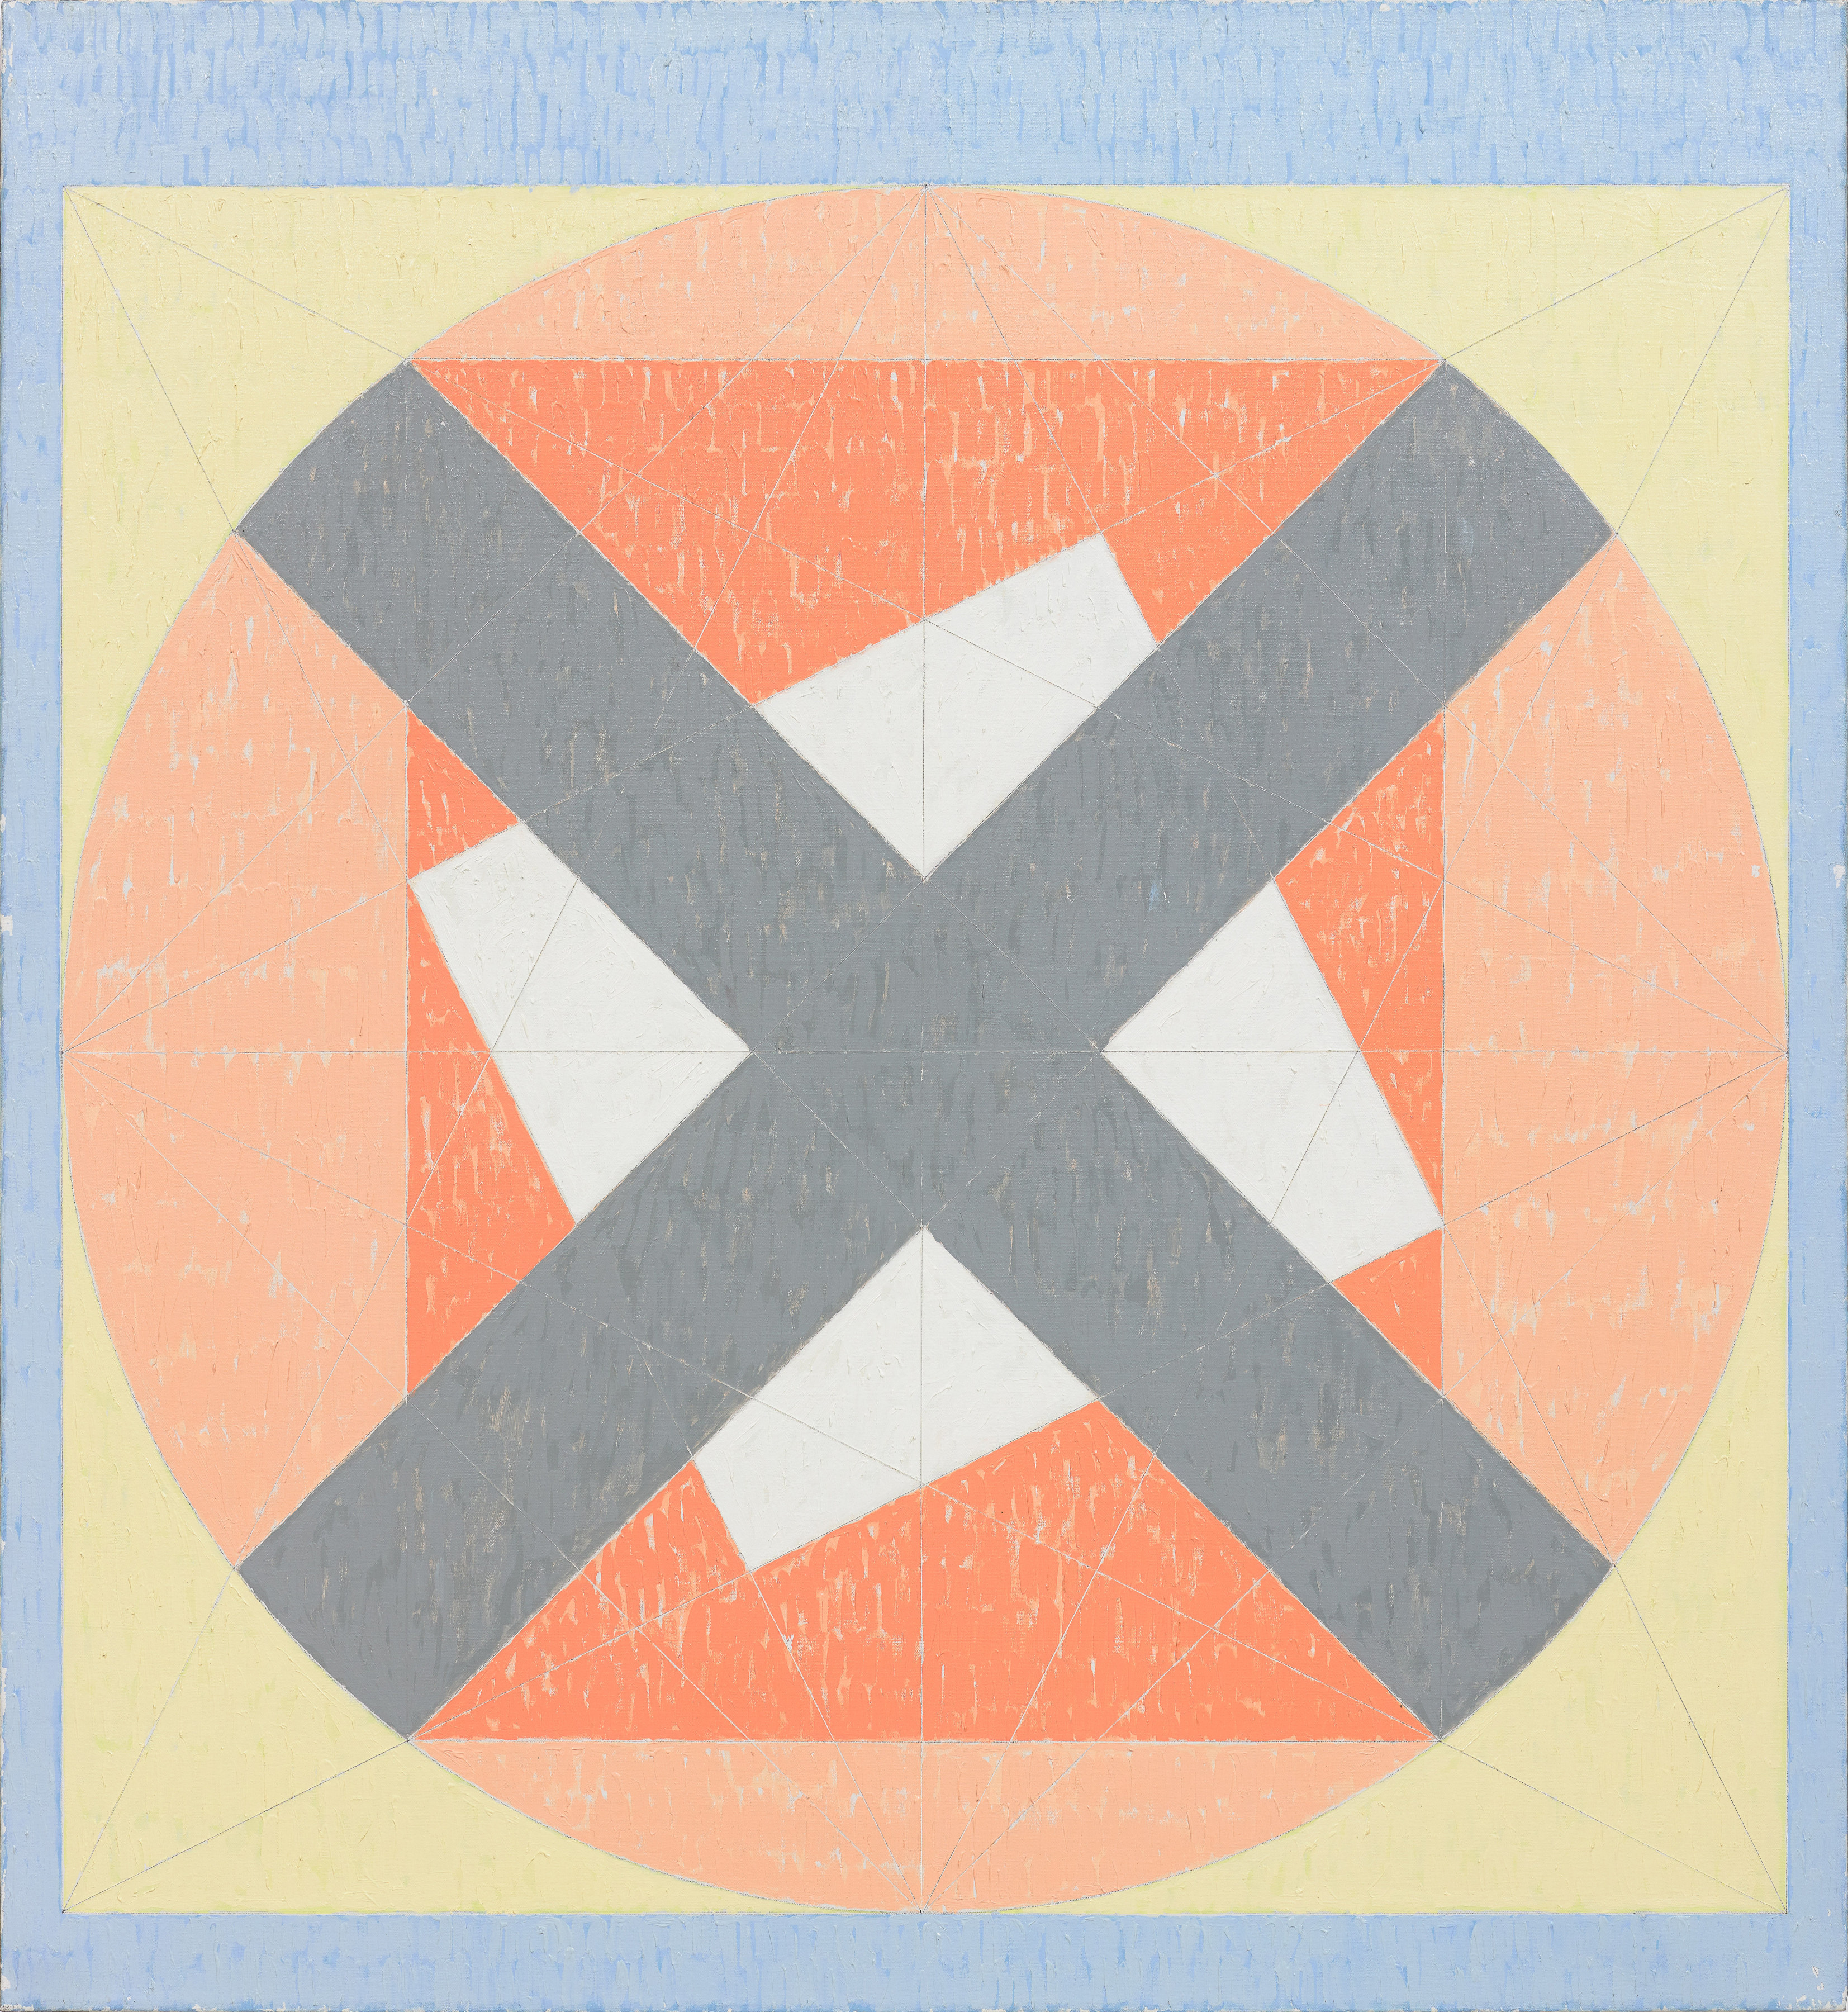 X on Circle in the Square (Q4-81 #2), 1981, Acrylic on canvas